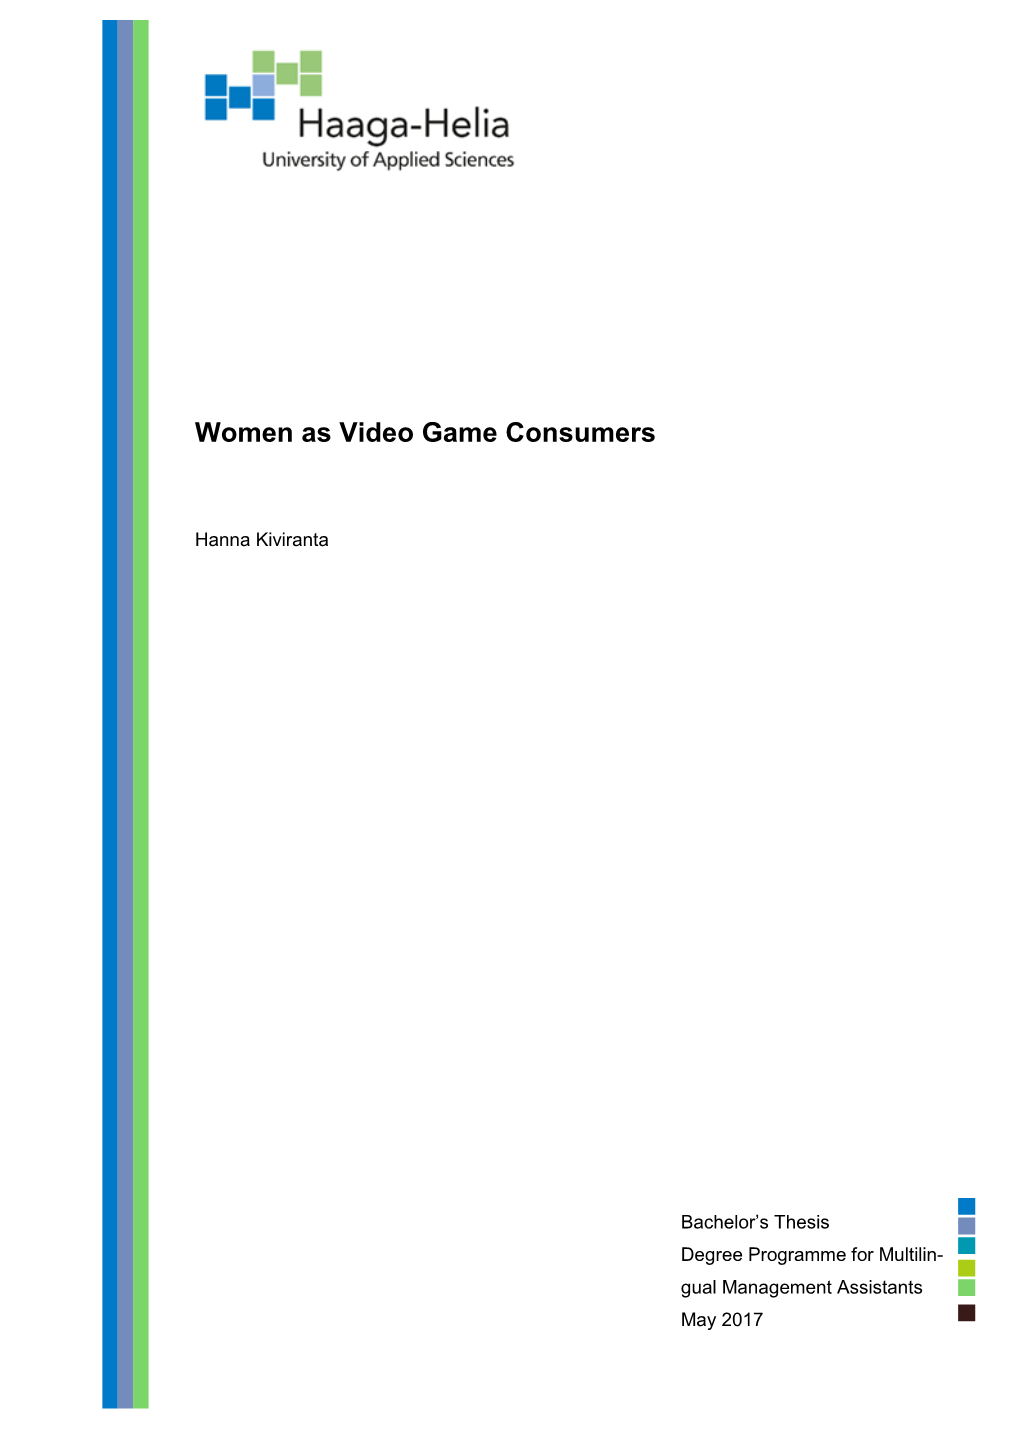 Women As Video Game Consumers